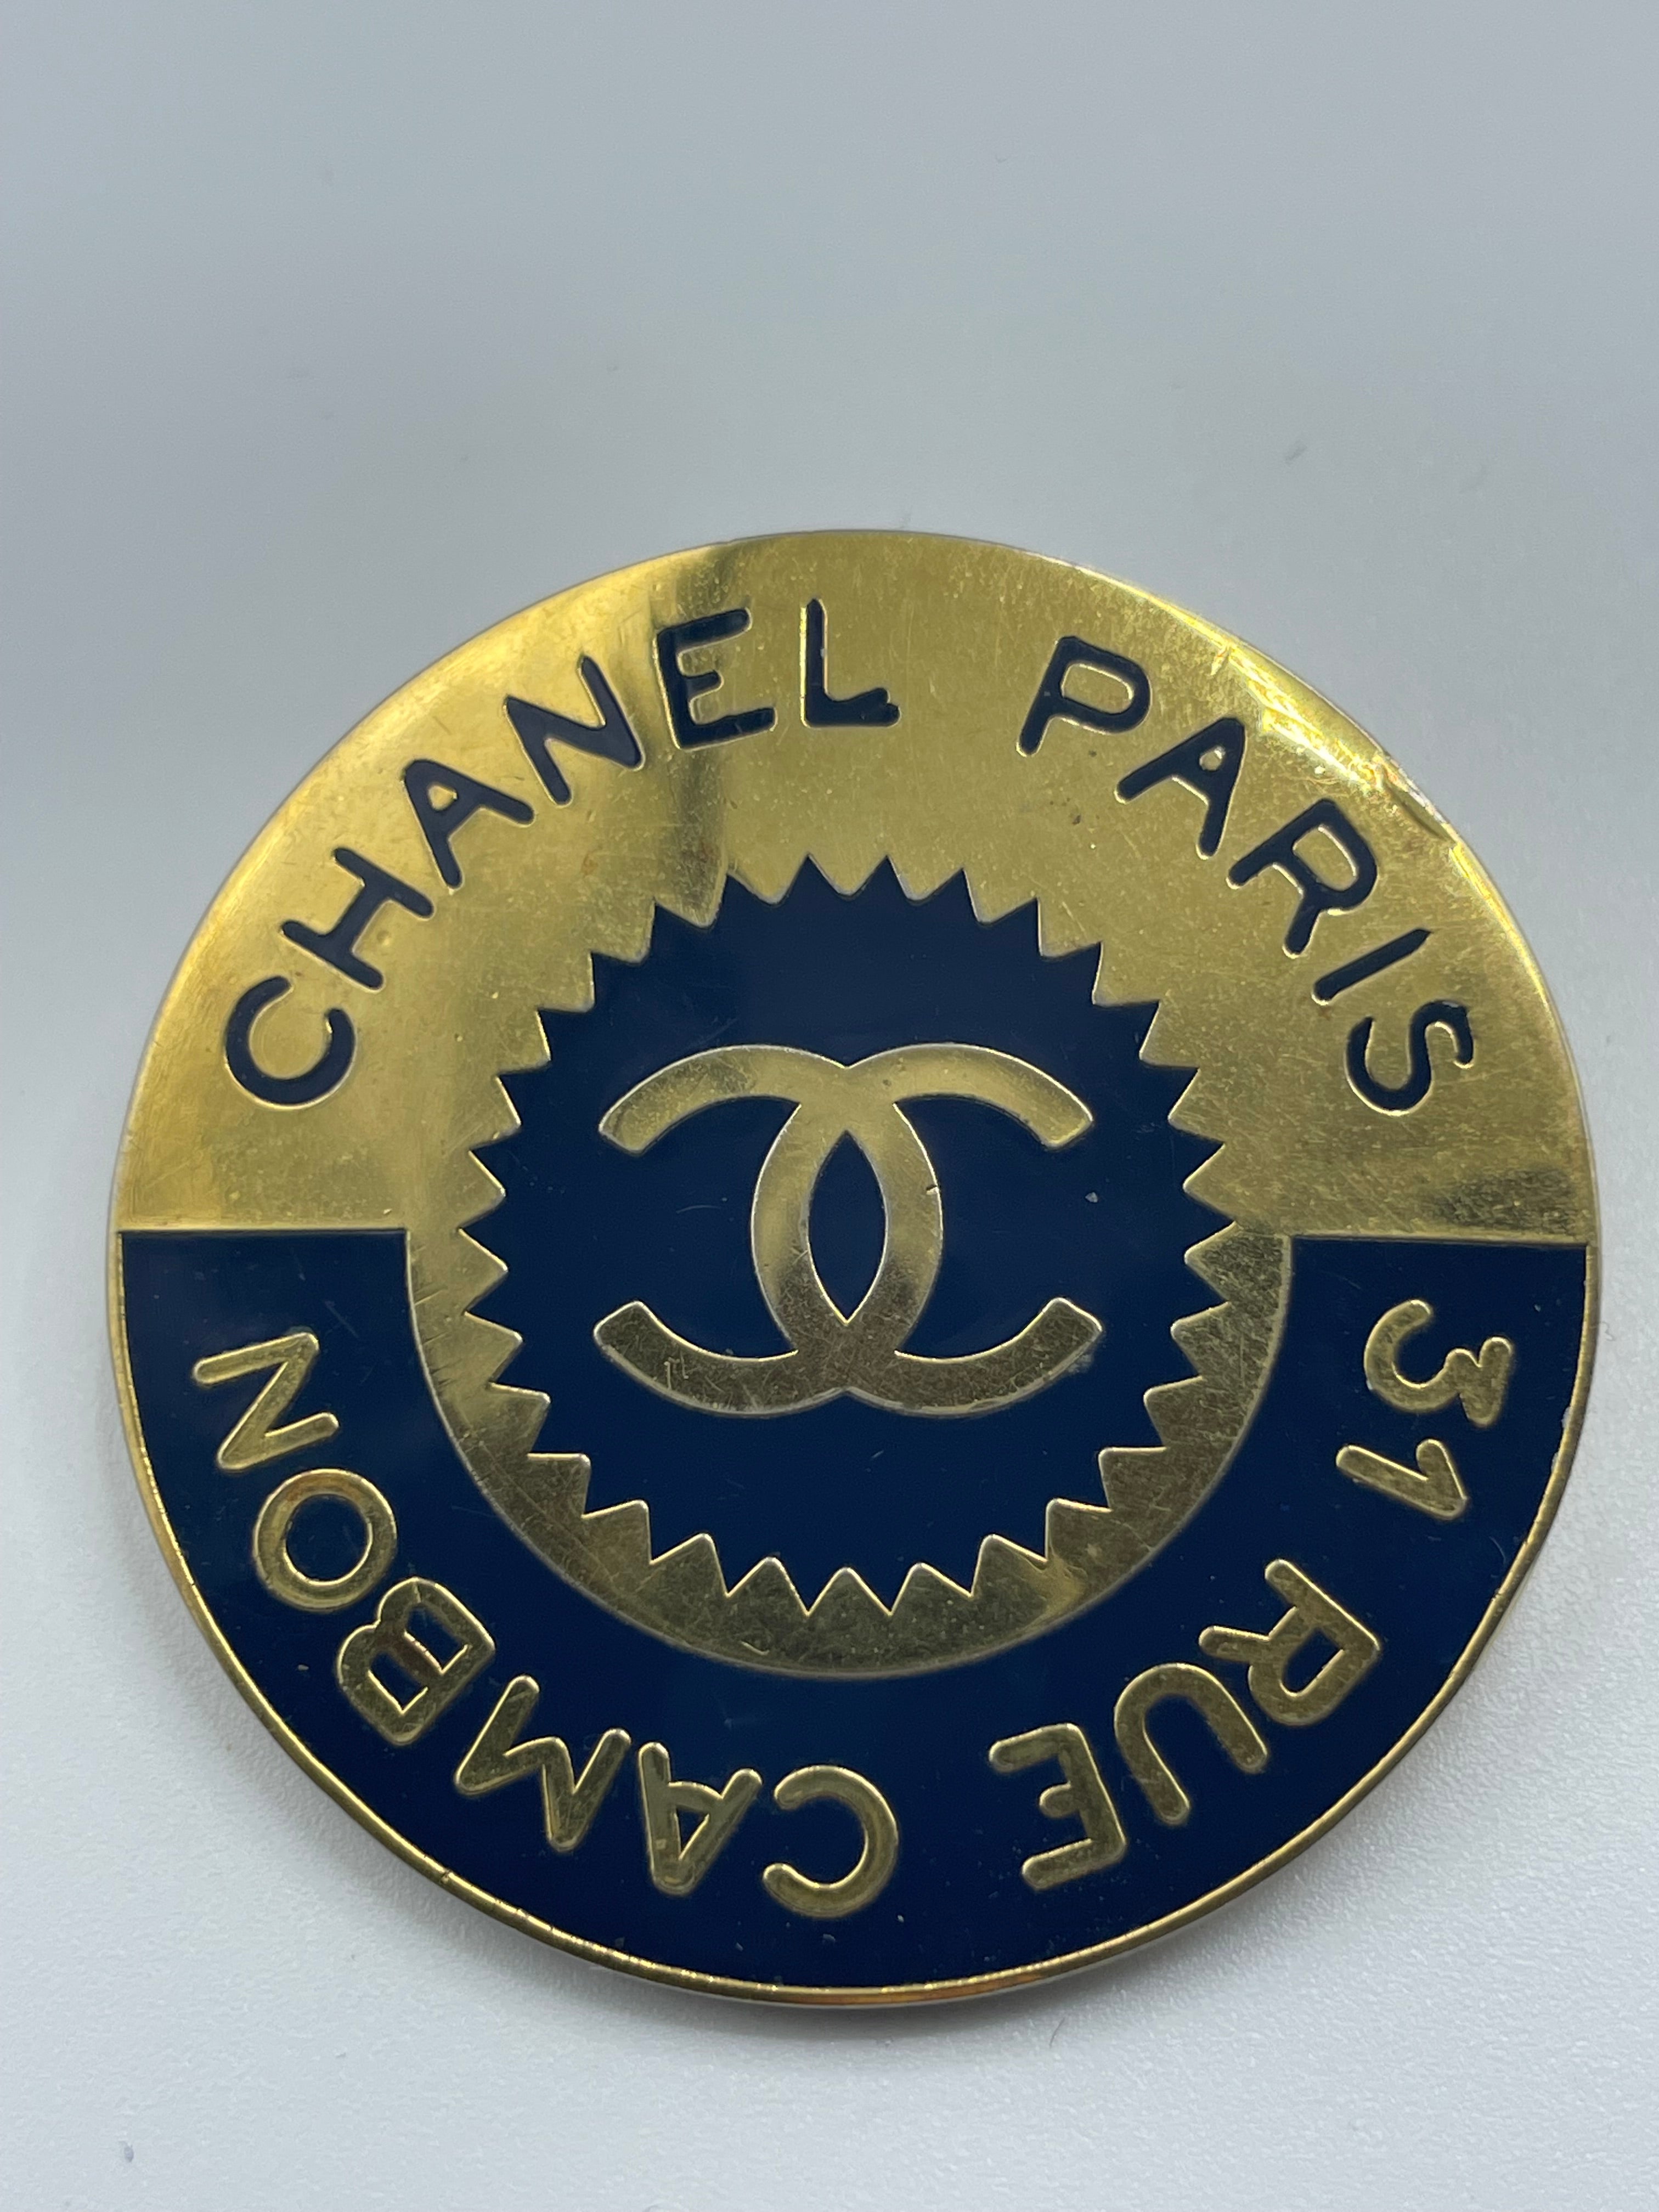 Chanel 31 Rue Cambon Paris Brooch.  A black and gold circular brooch with the Chanel CC in the center. 
Chanel stamp in the reverse.
Made in France. 
In perfect condition and quality. 